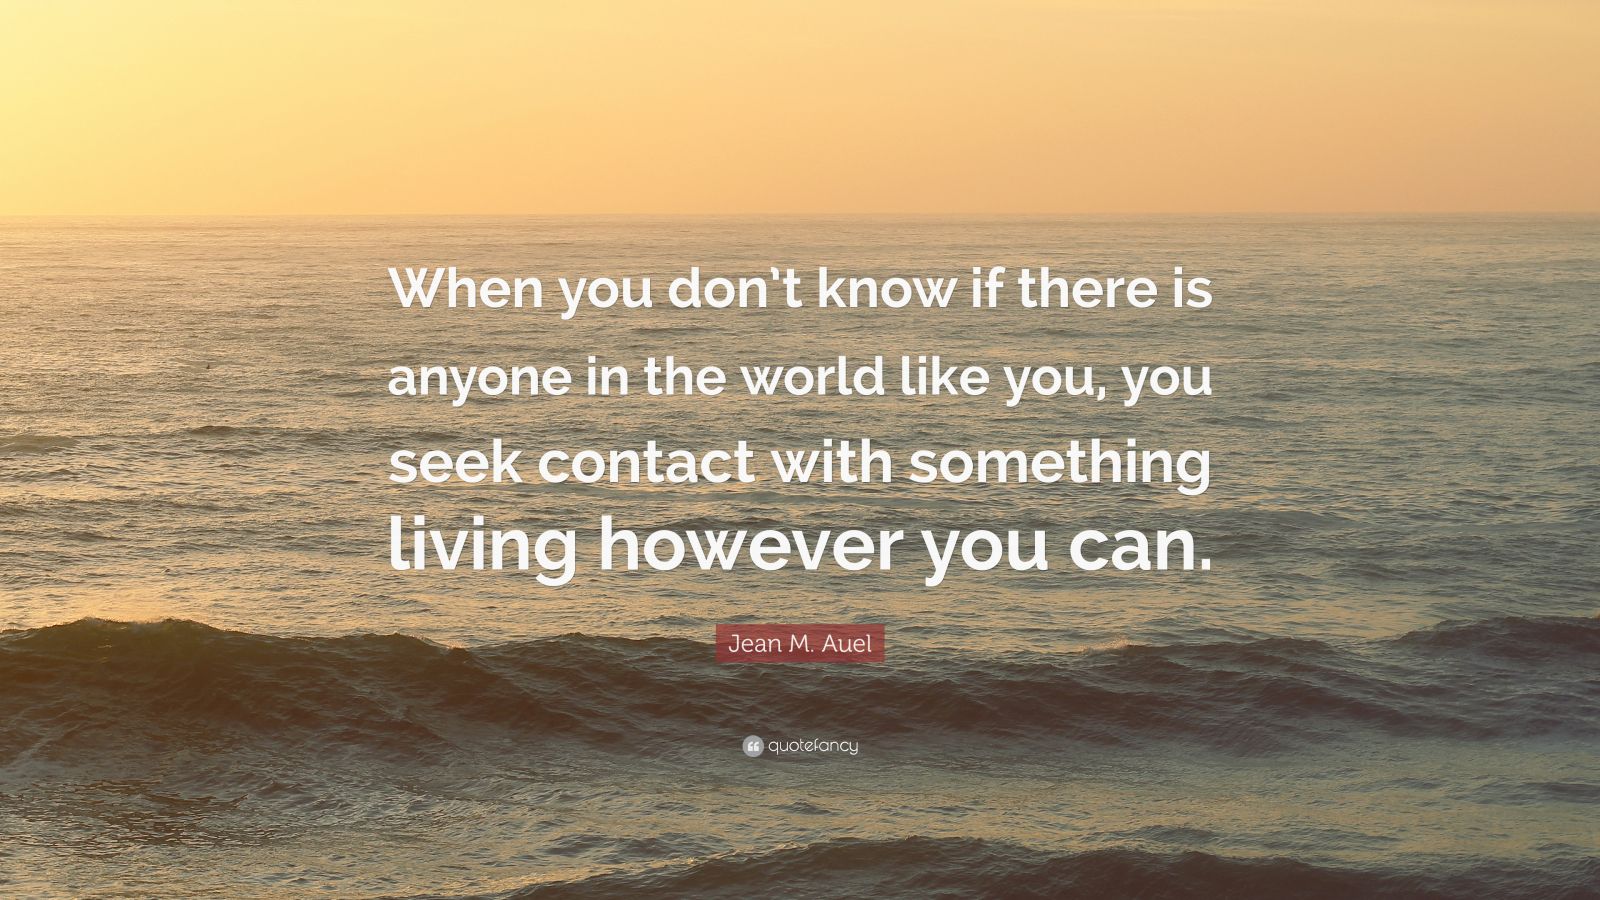 Jean M. Auel Quote: “When you don’t know if there is anyone in the ...